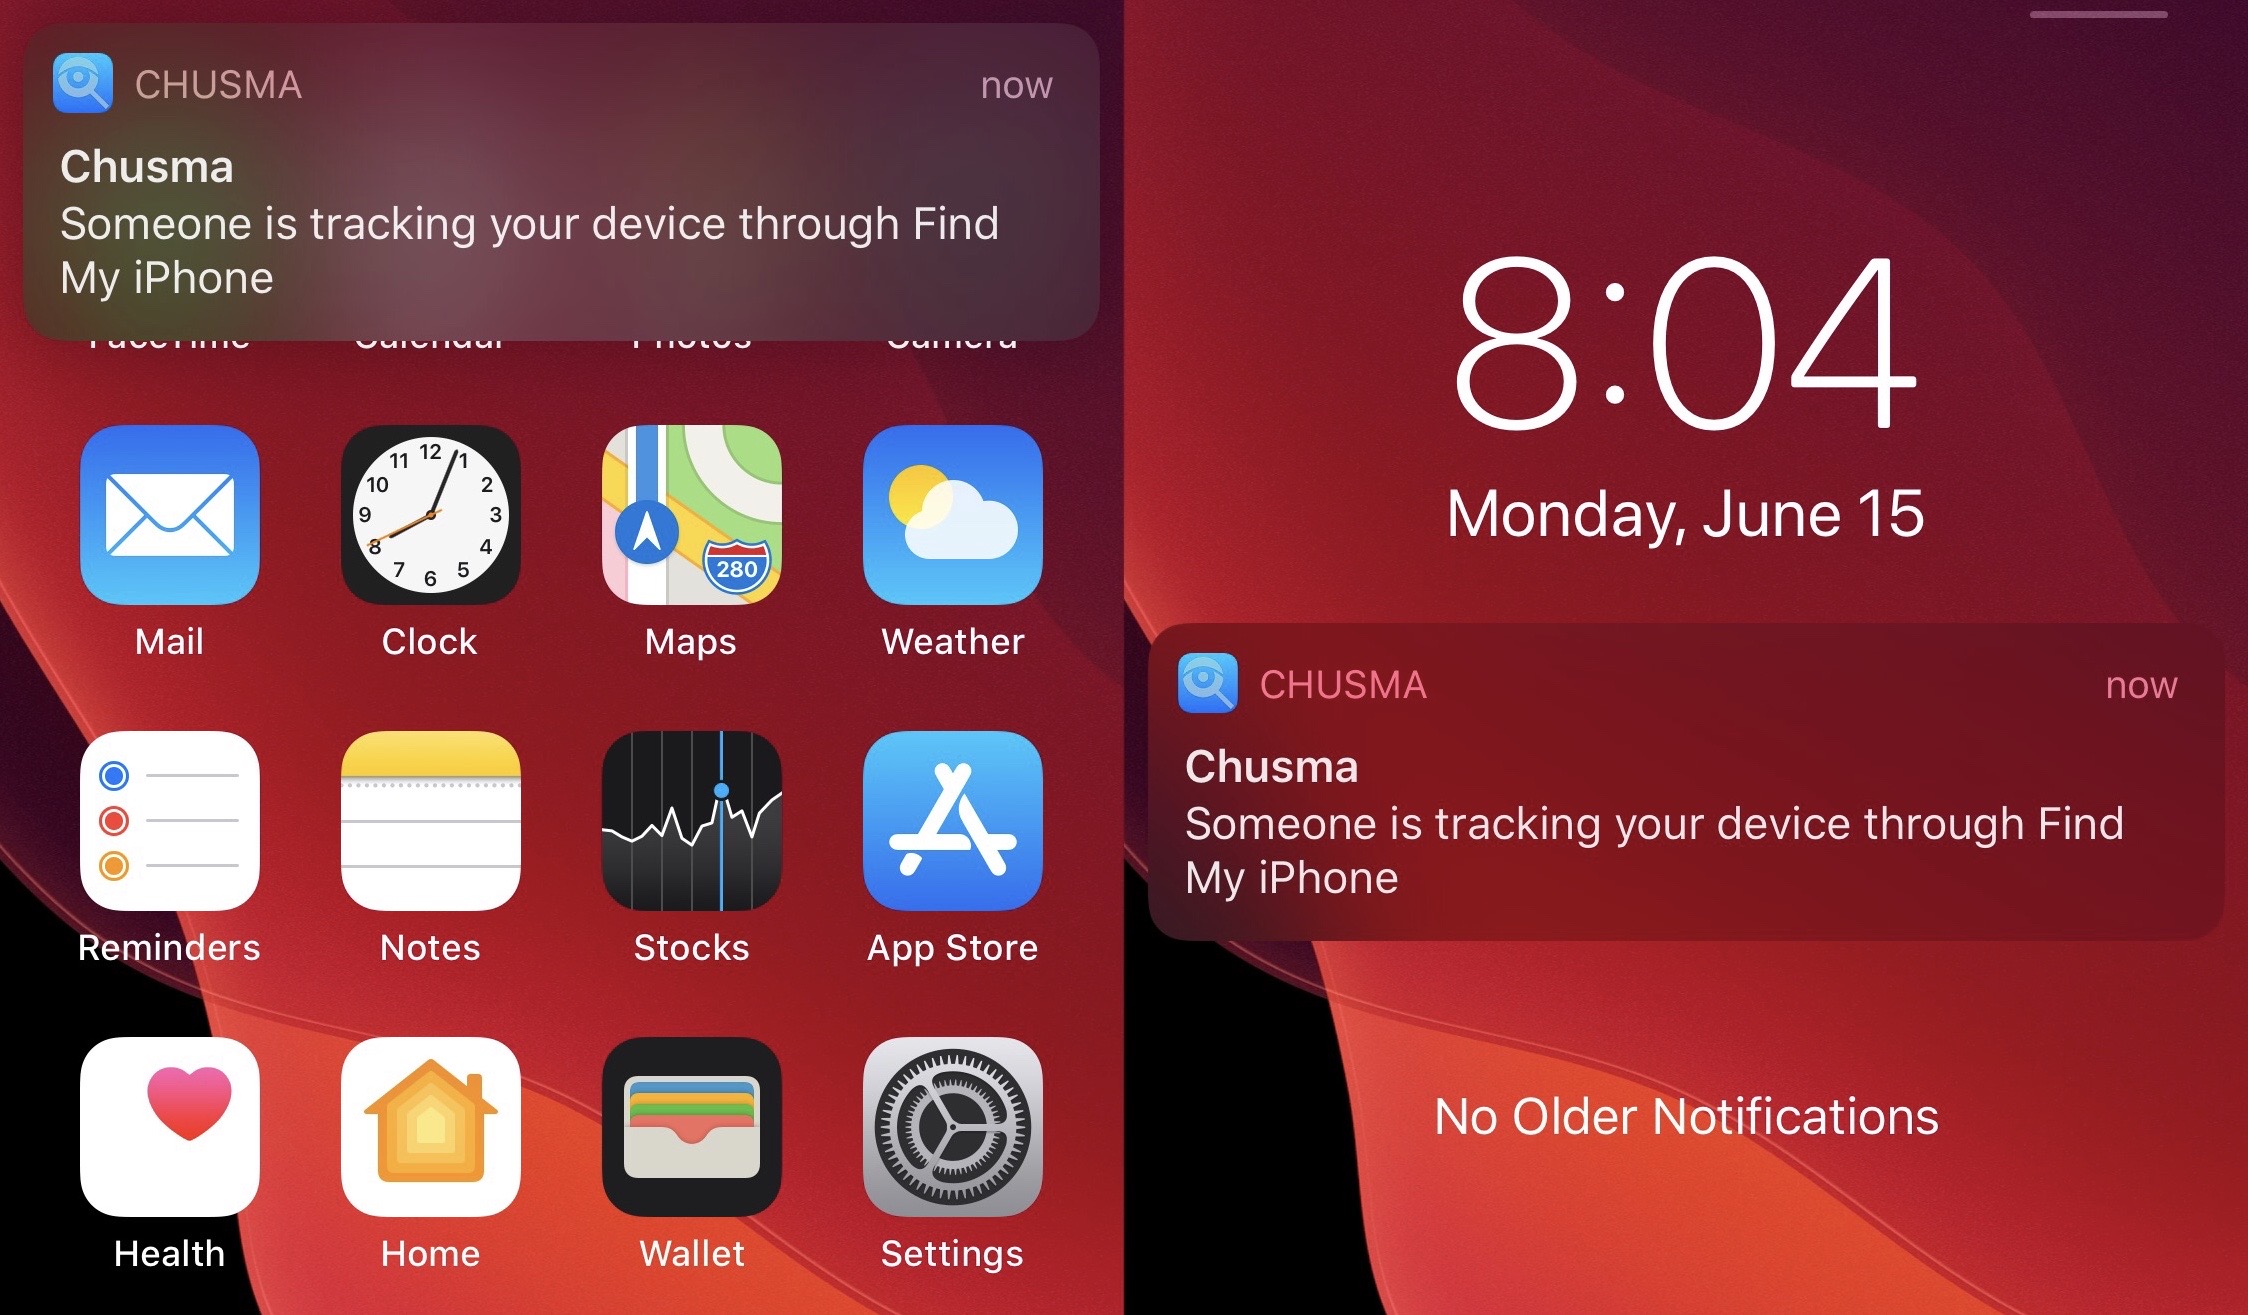 Notification when your iPhone’s location is being used to track you.